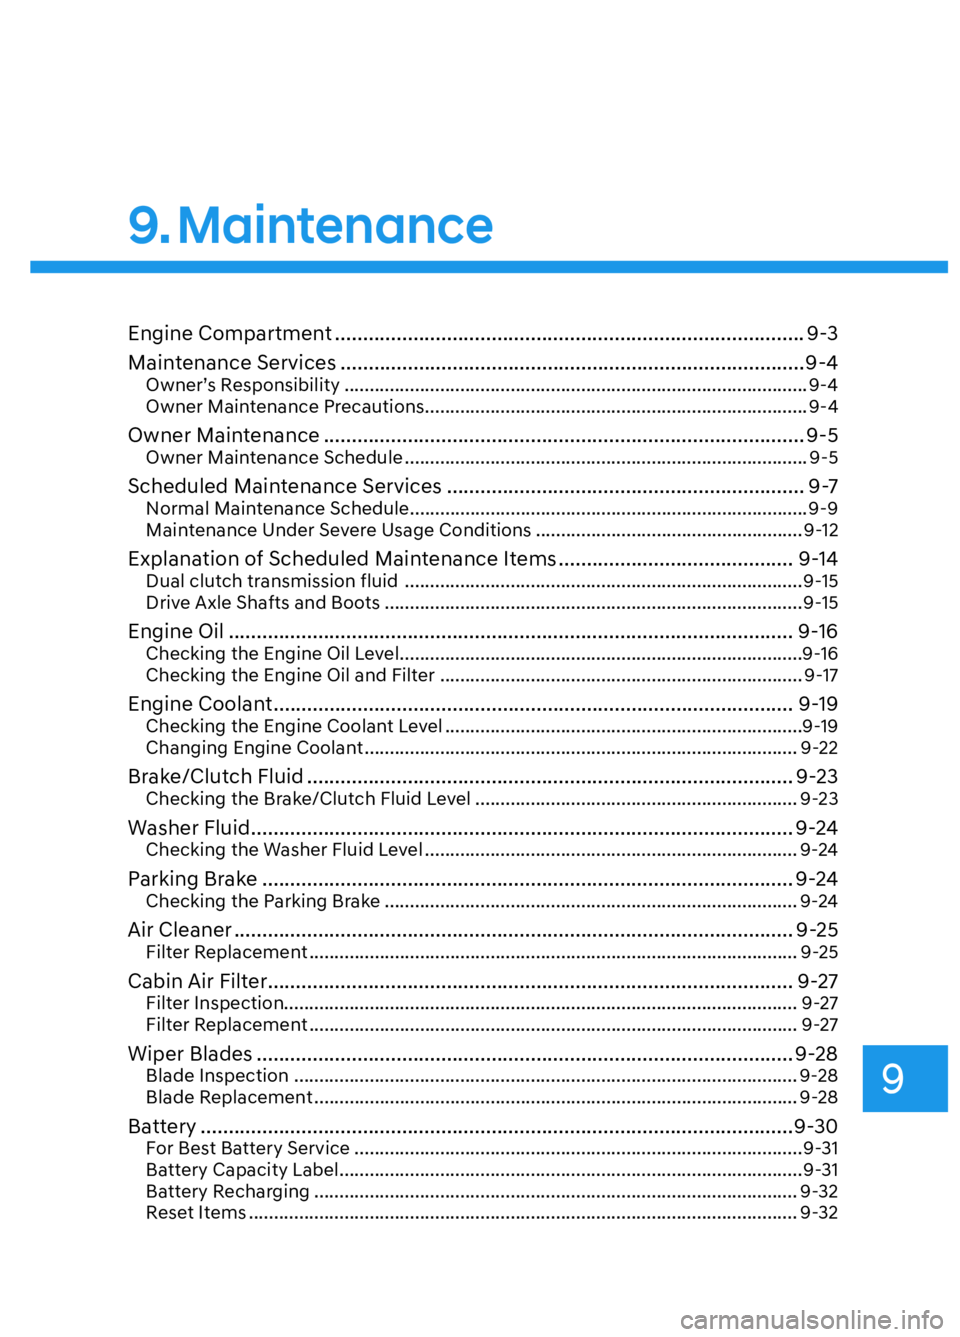 HYUNDAI ELANTRA N 2022  Owners Manual Engine Compartment ........................................................................\
............ 9-3
Maintenance Services .....................................................................